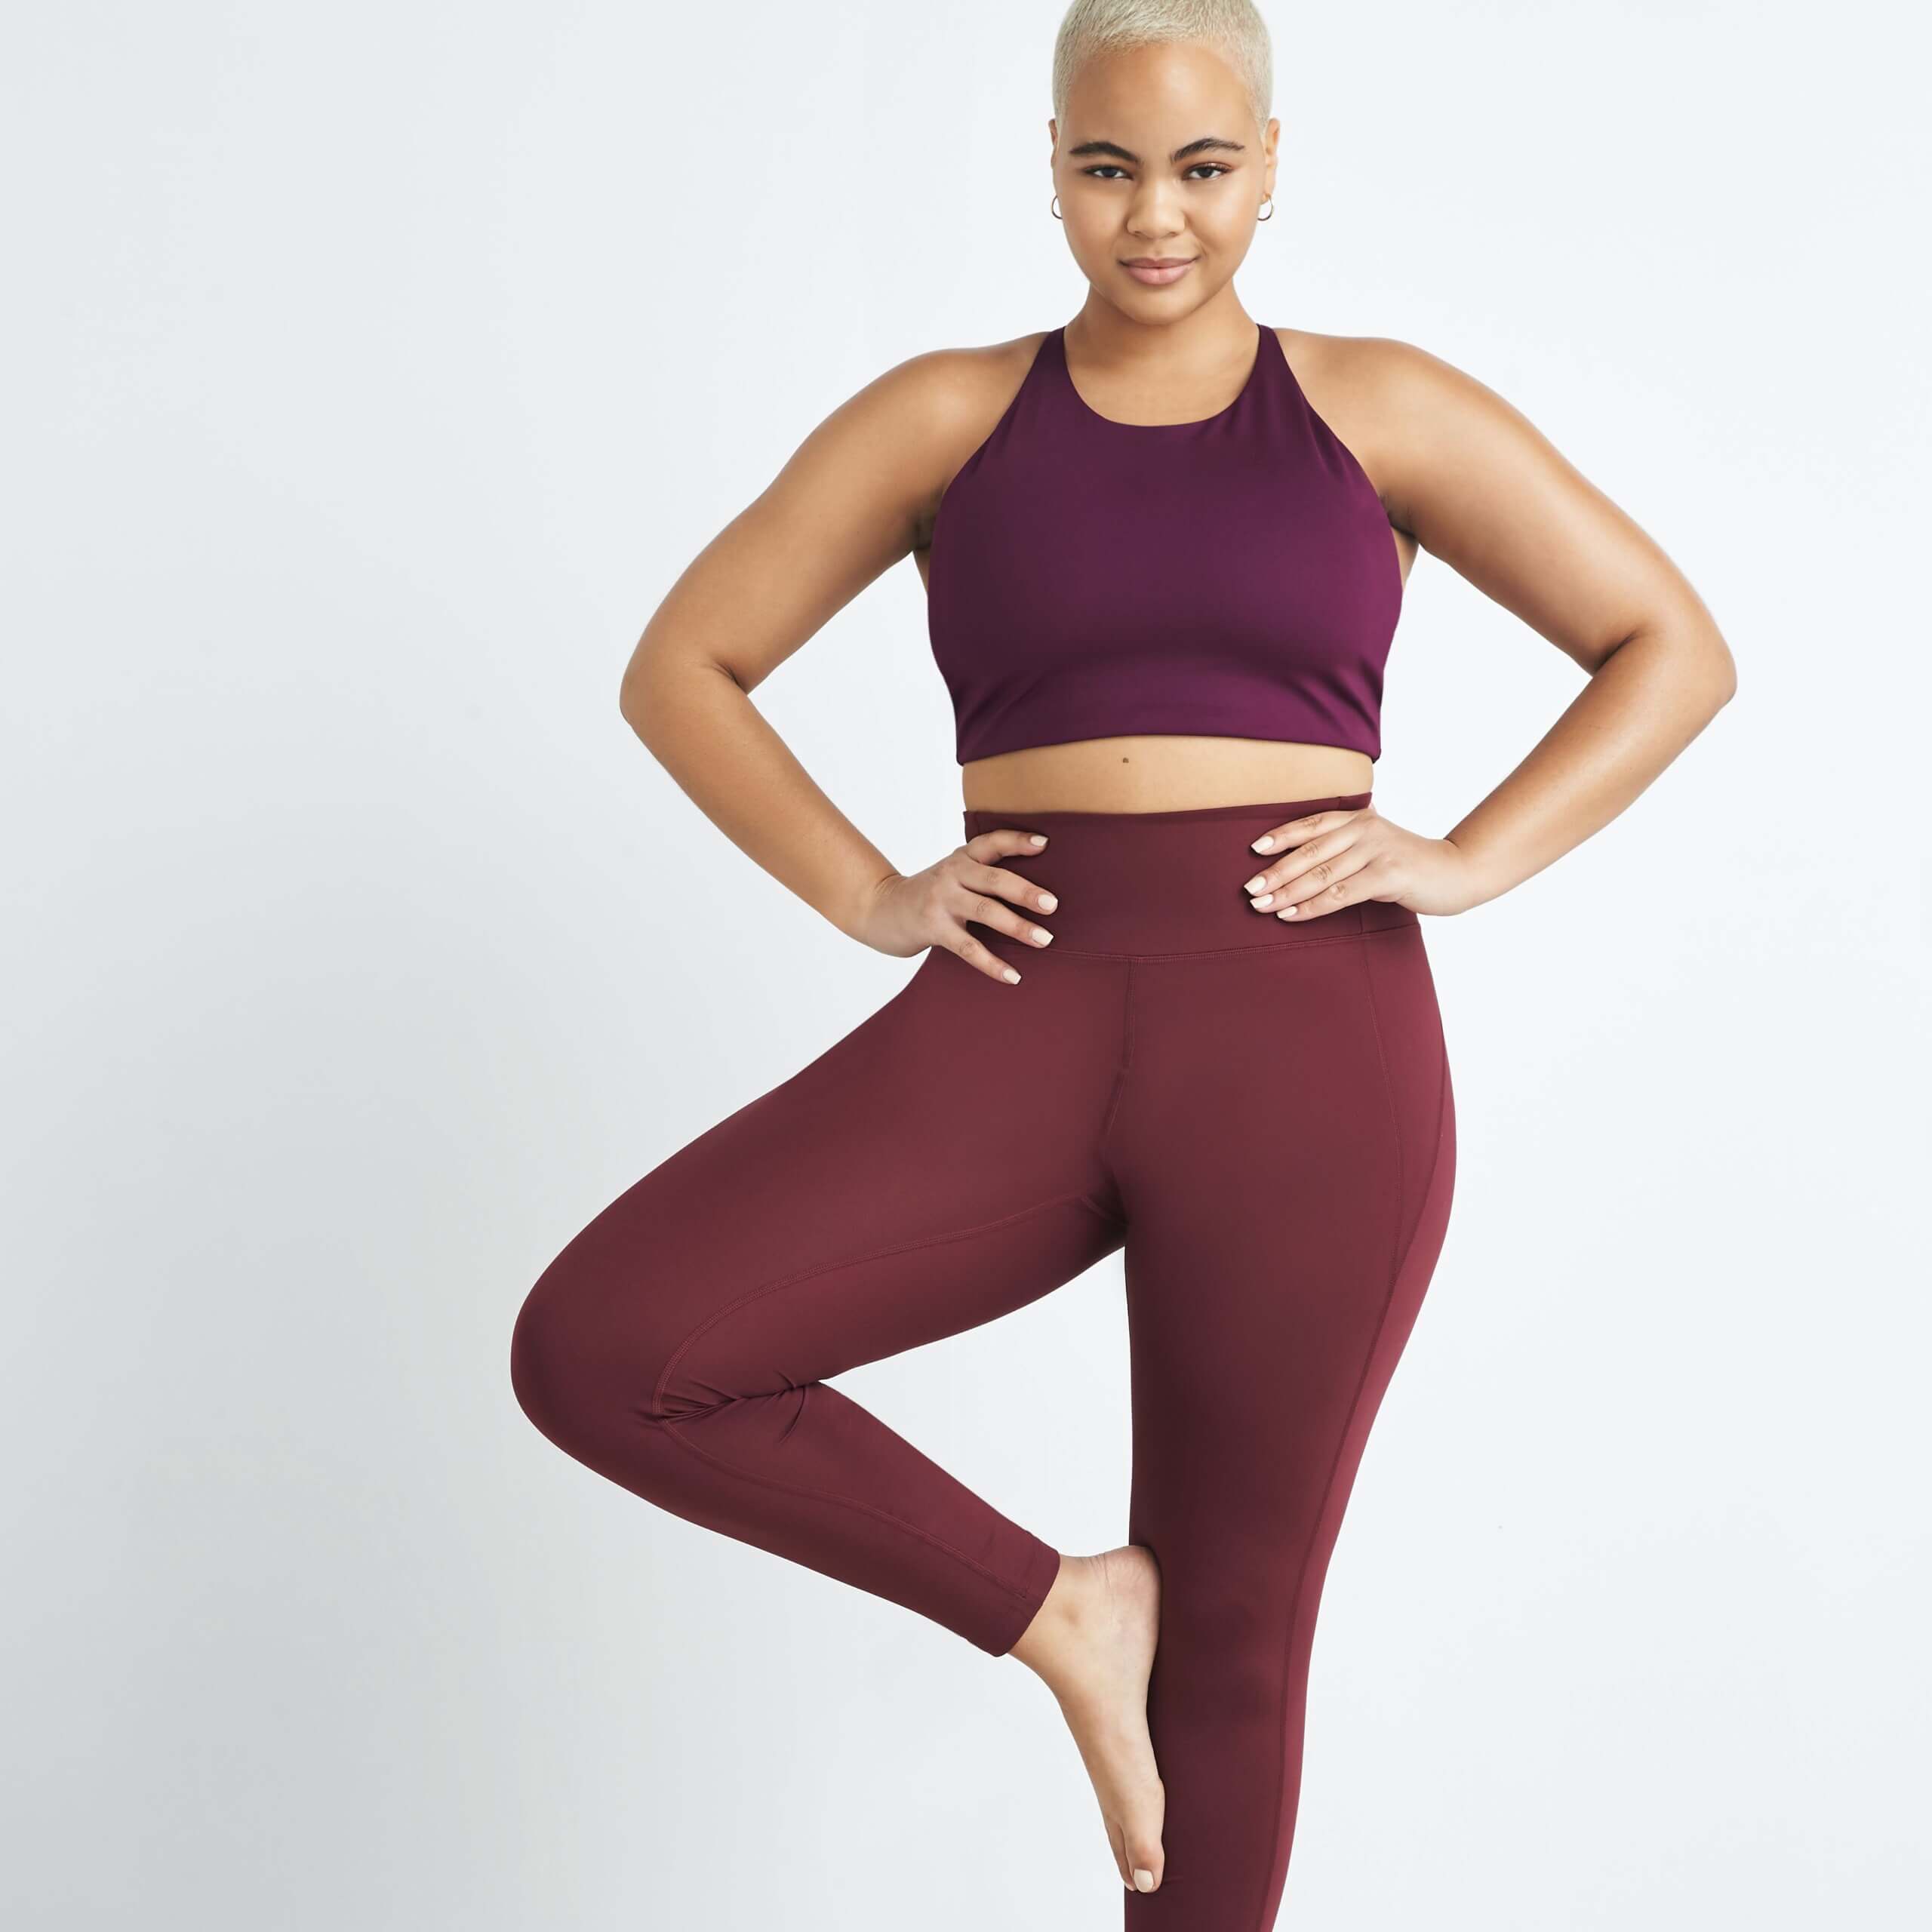 What Should You Wear to Yoga? A Complete Guide for Beginners.